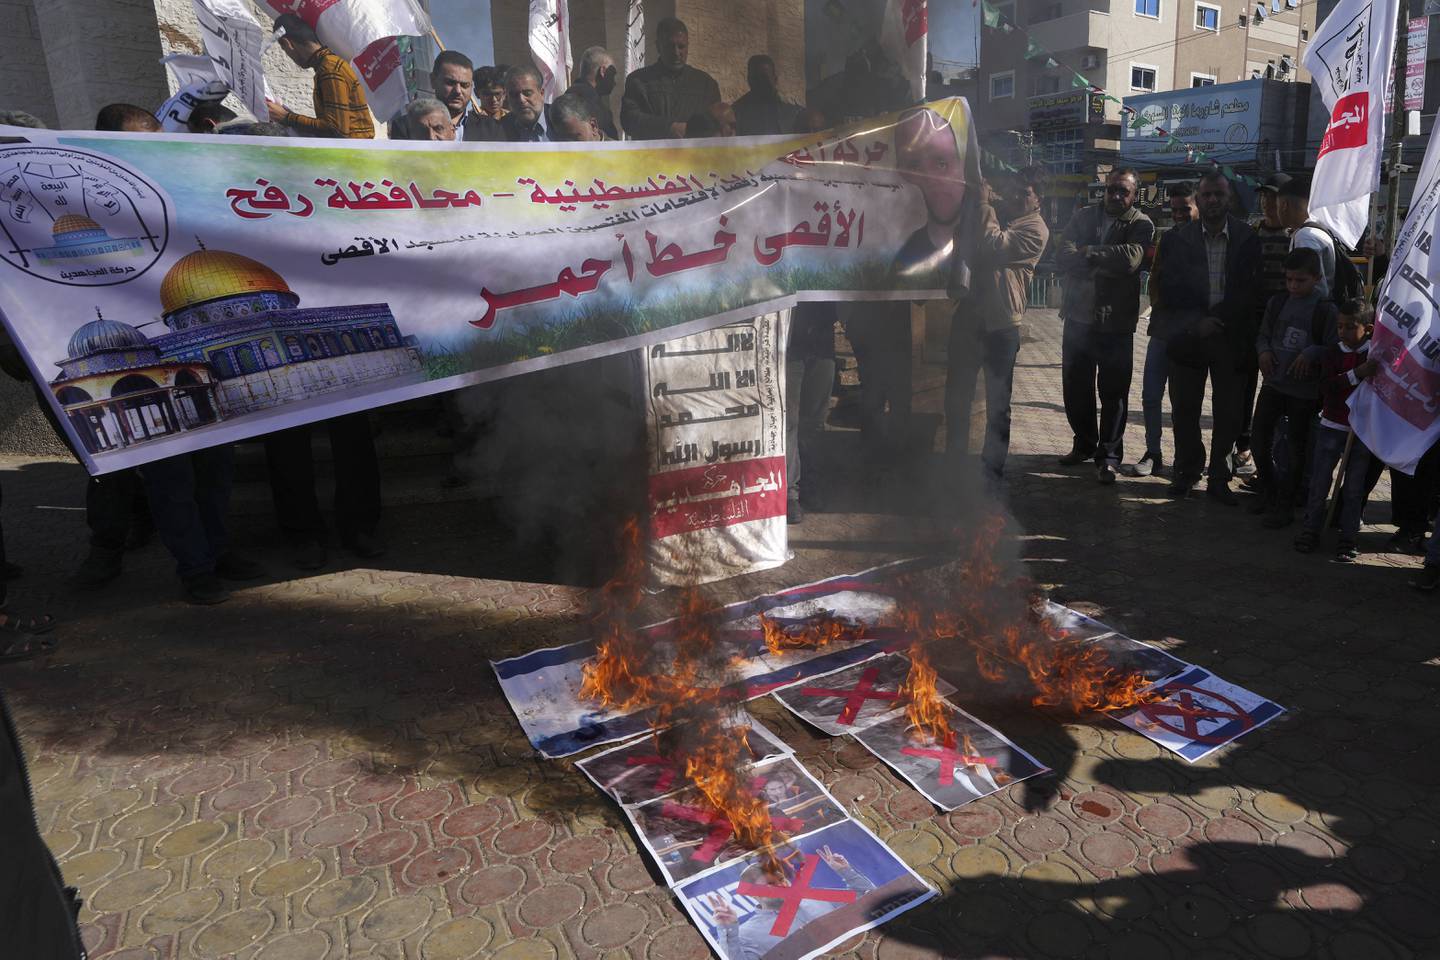 Palestinians burn pictures of Israeli prime minister-designate Benjamin Netanyahu and Israeli politicians Bezalel Smotrich and Itamar Ben-Gvir during a protest in Gaza's Rafah refugee camp. AP